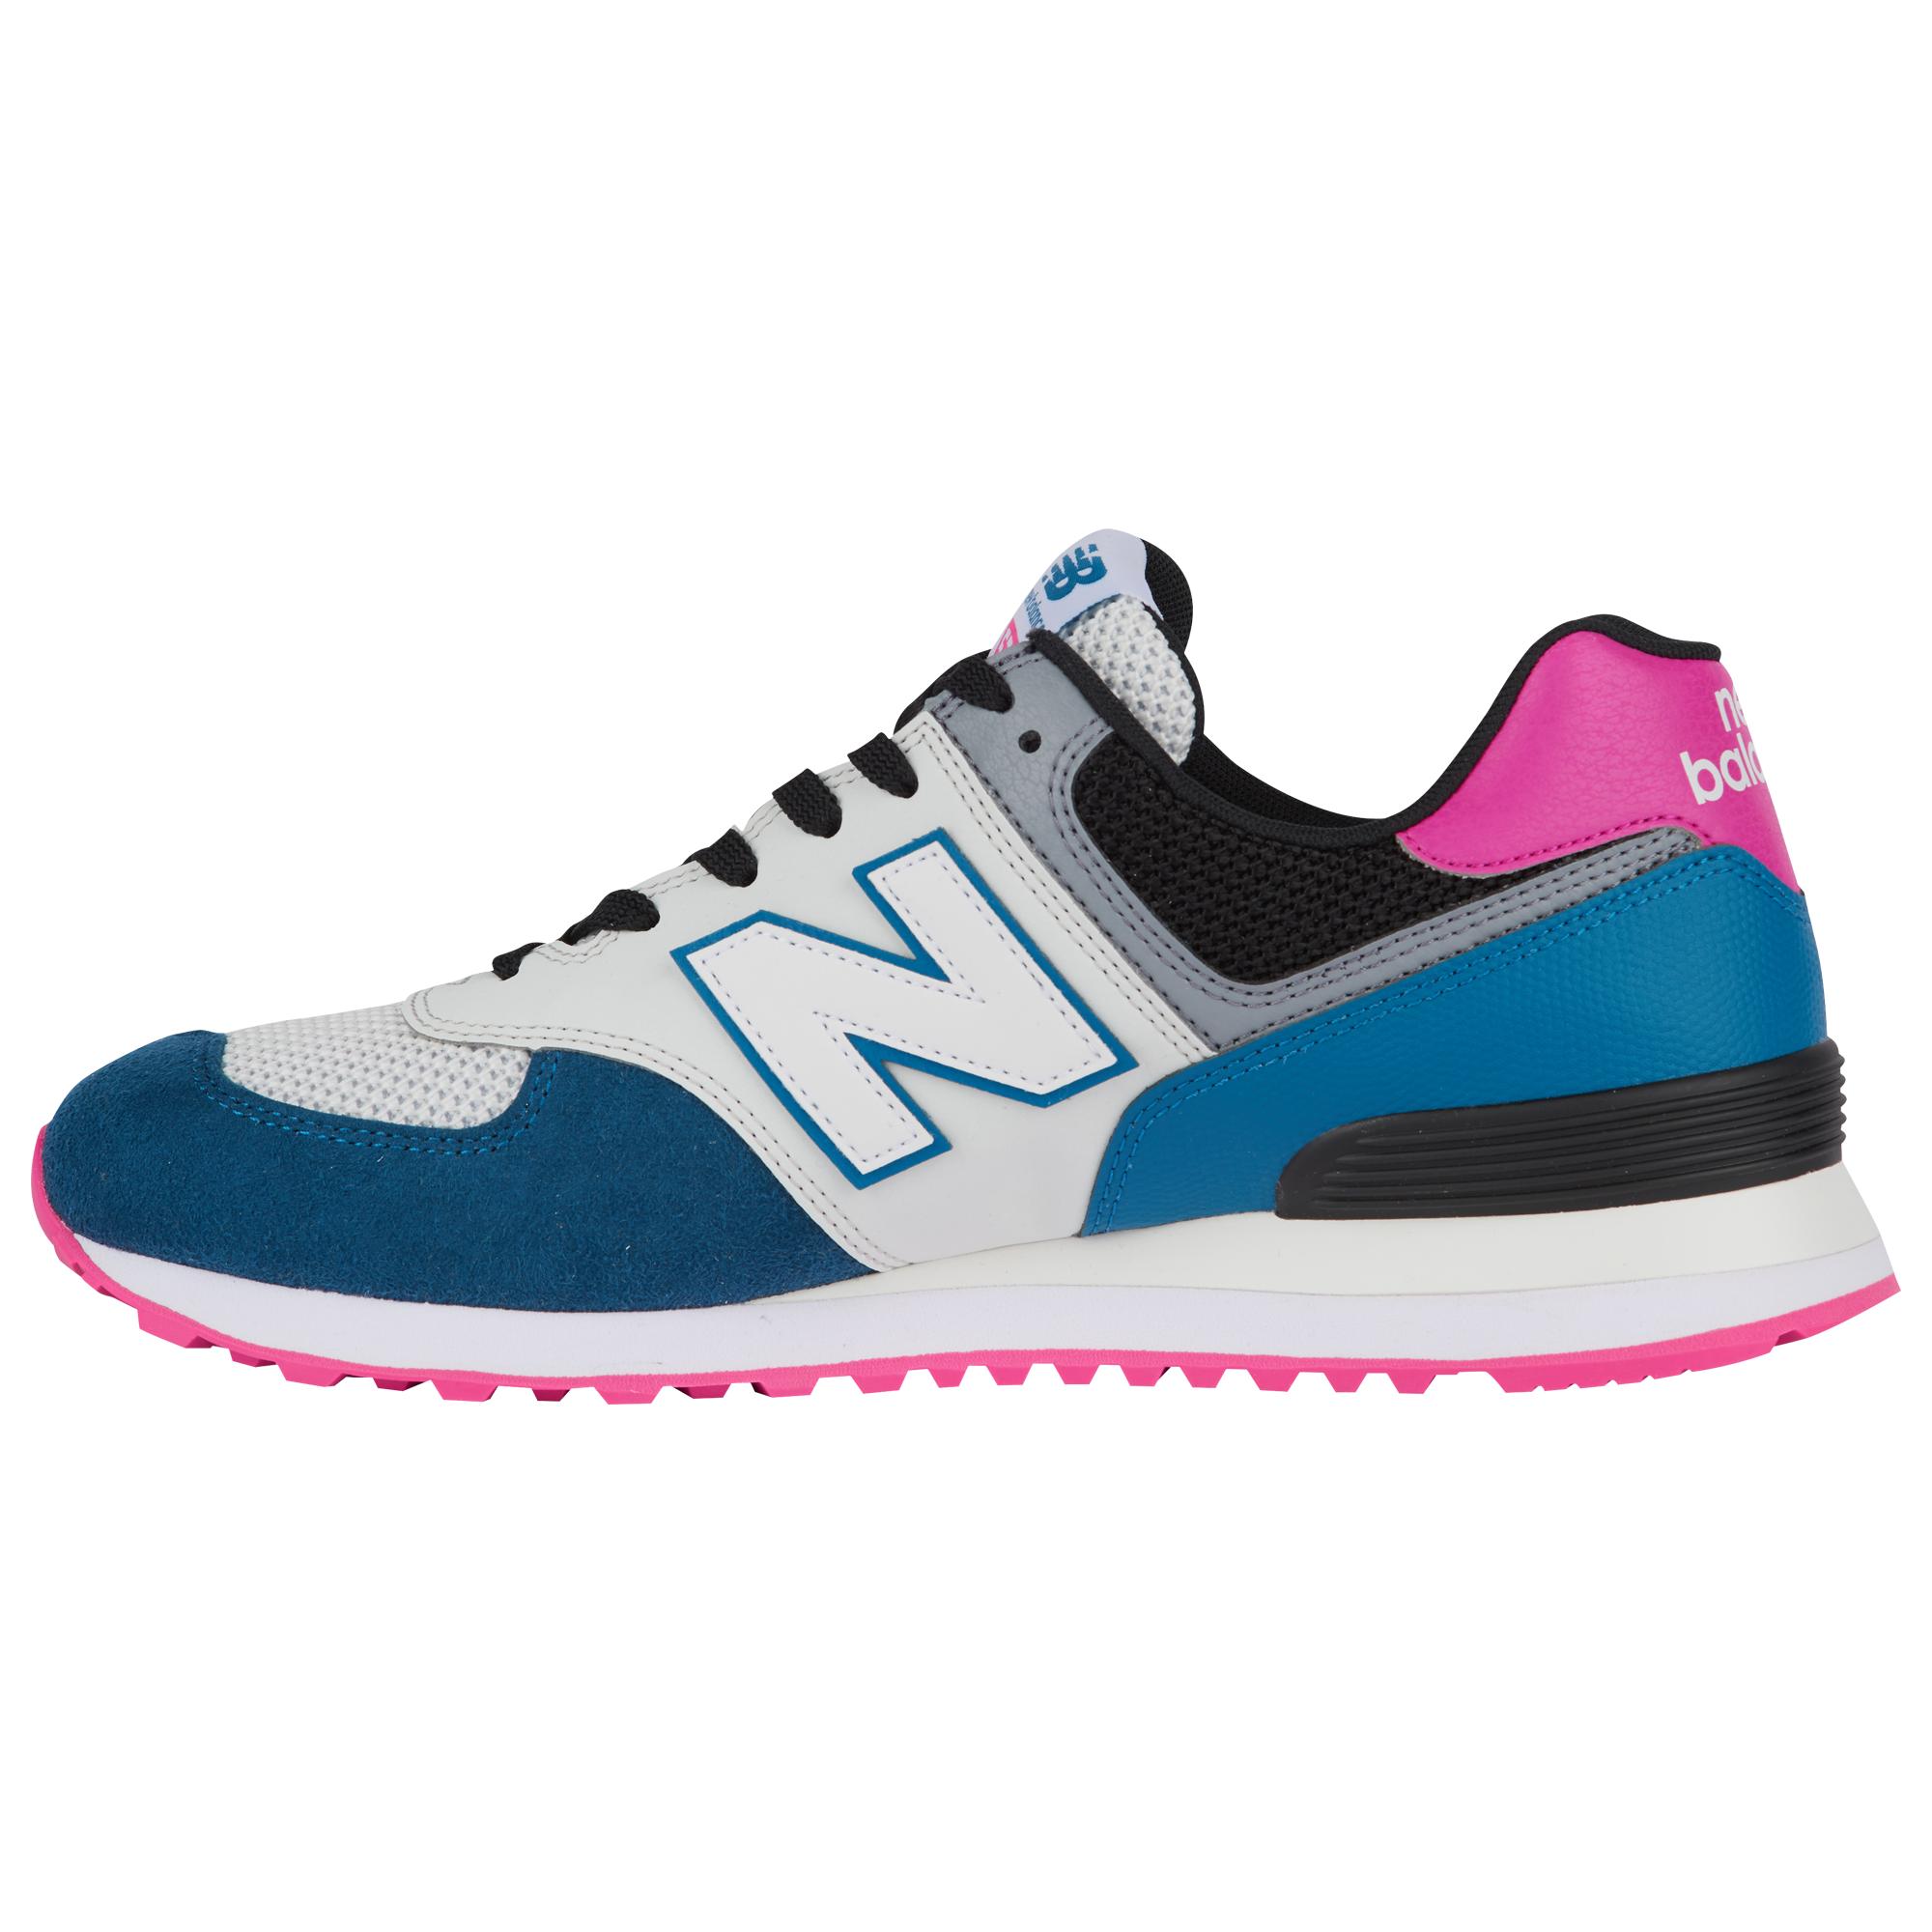 New Balance 574 in Blue for Men - Lyst